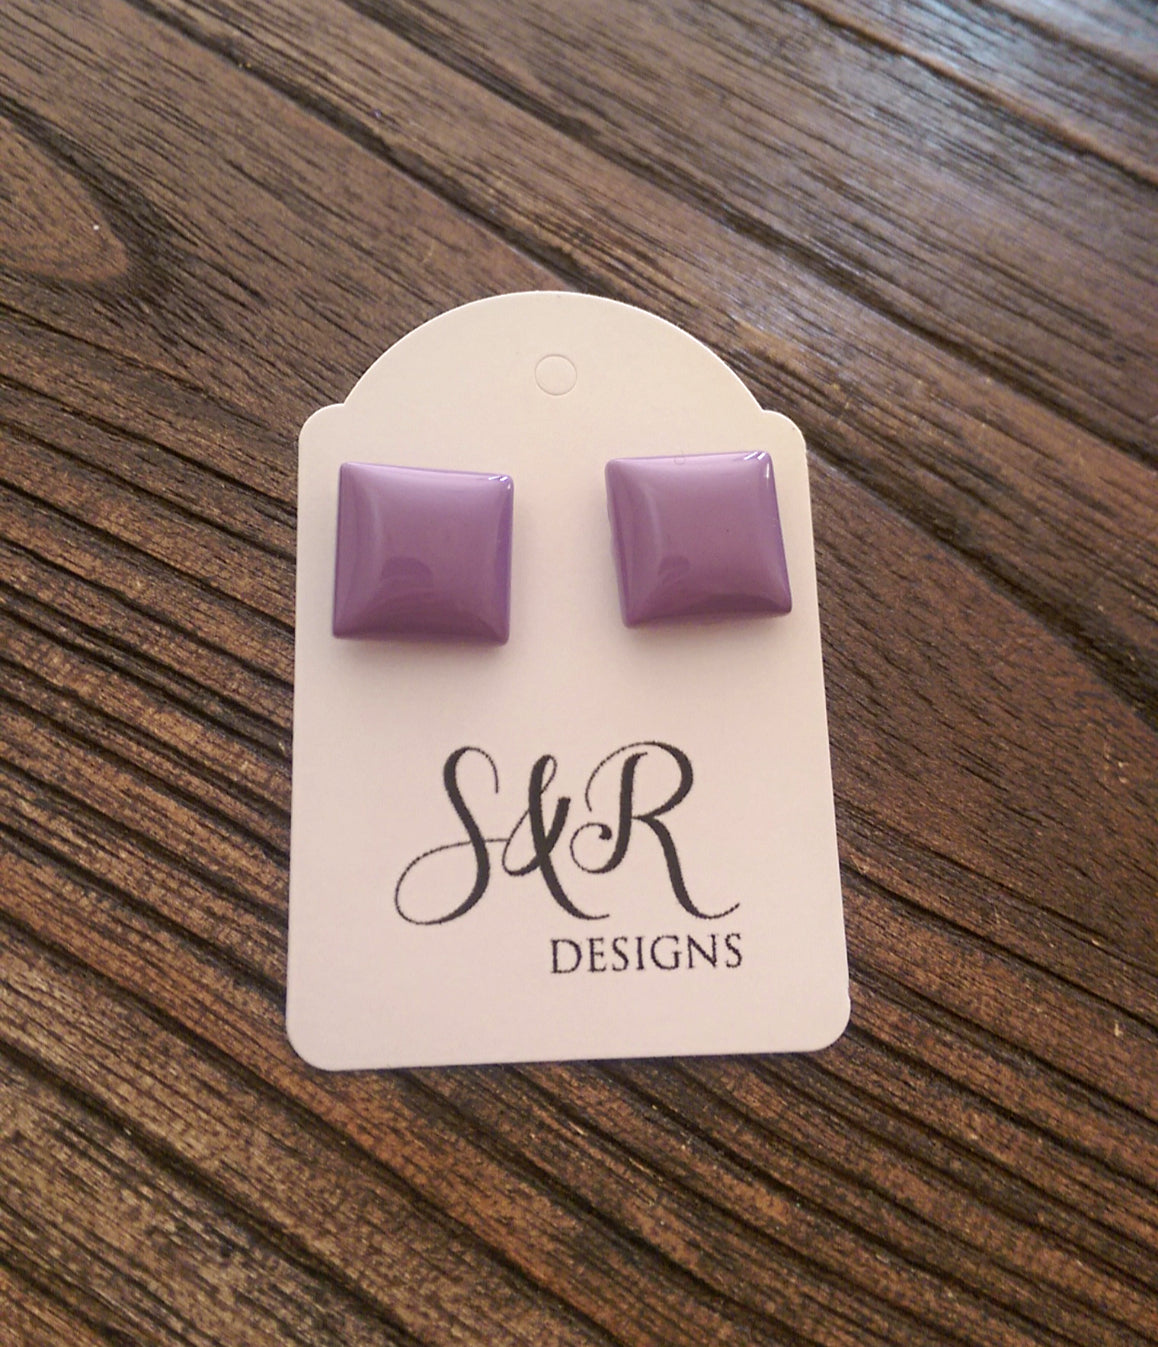 Lilac Square Resin Stud Earrings, Stainless Steel Stud Earrings. 12mm - Silver and Resin Designs